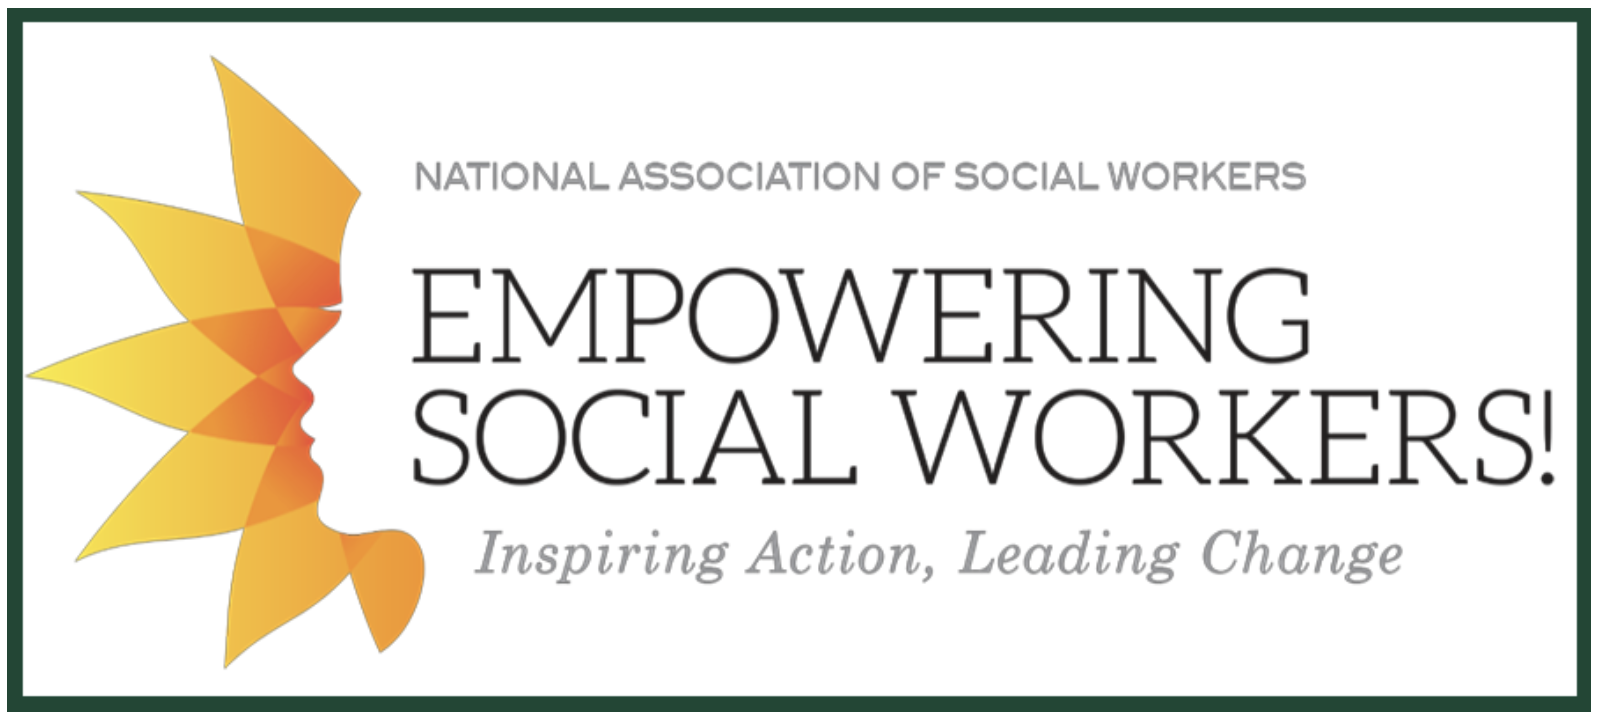 empowering social workers logo with yellow sun and face